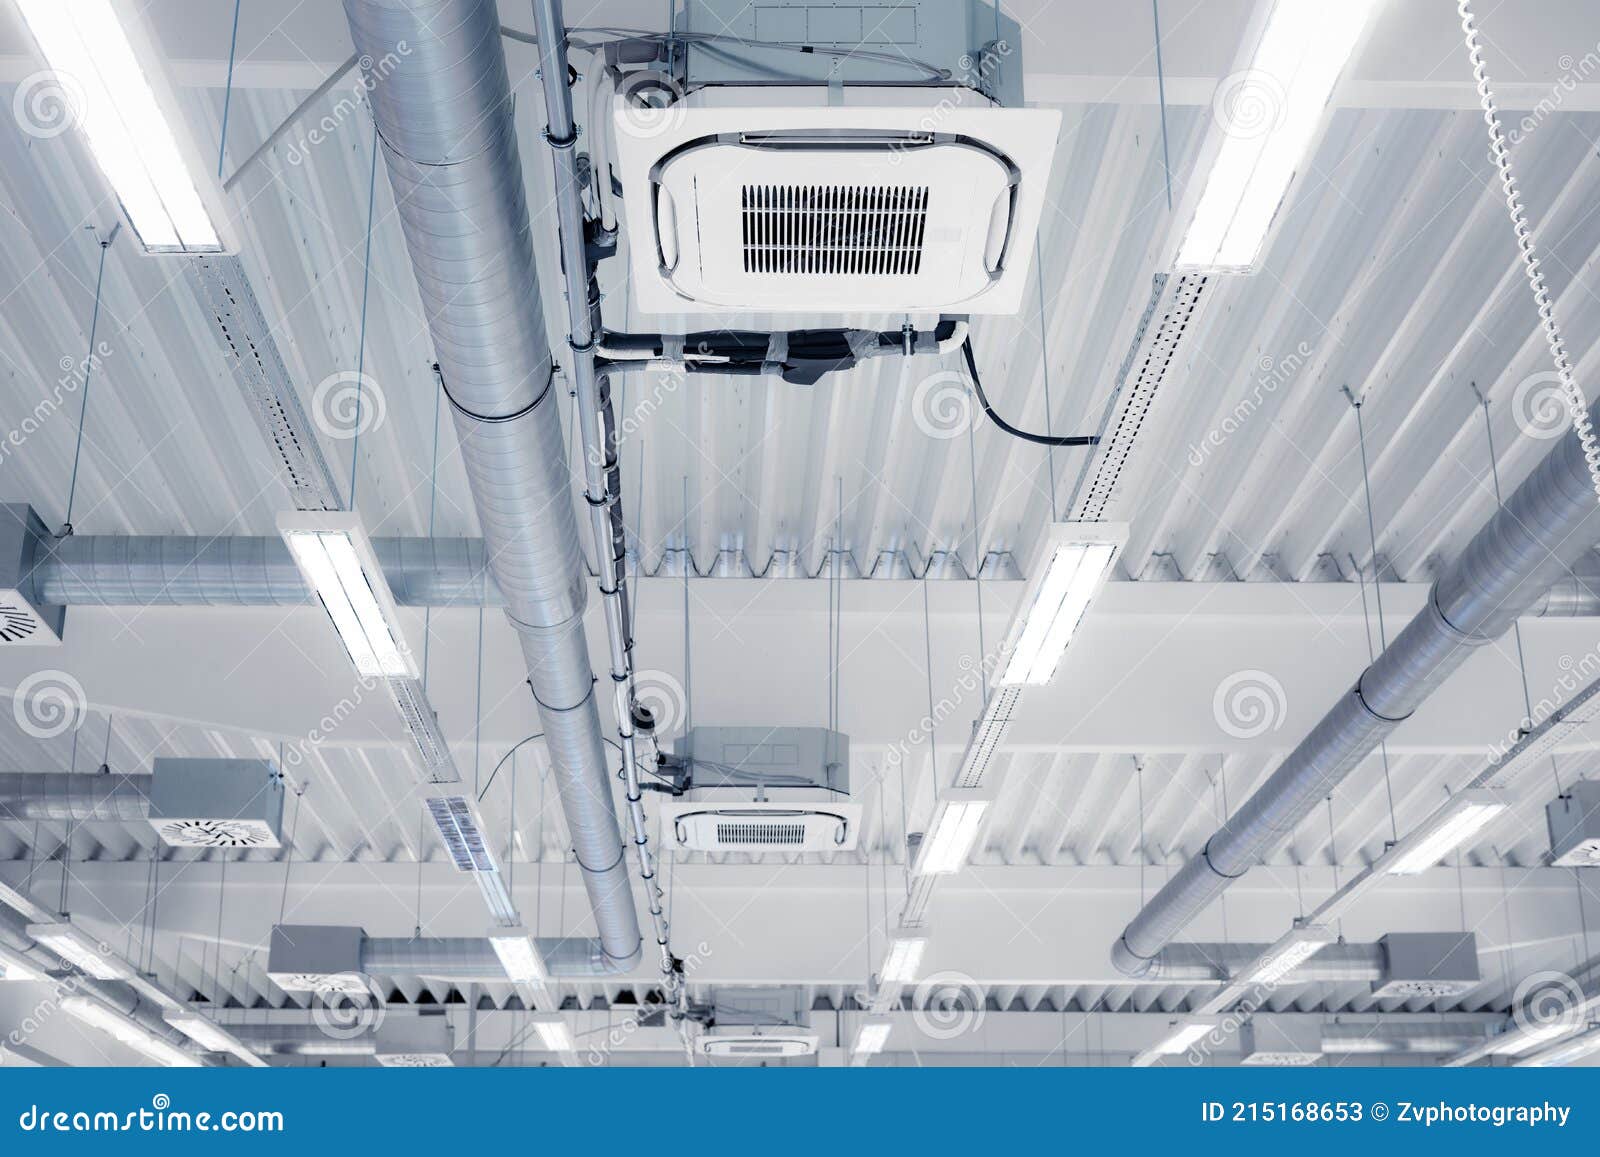 skrivning At søge tilflugt egoisme Ceiling Type of Air Conditioning Unit with Ventilation System Stock Image -  Image of electric, heat: 215168653